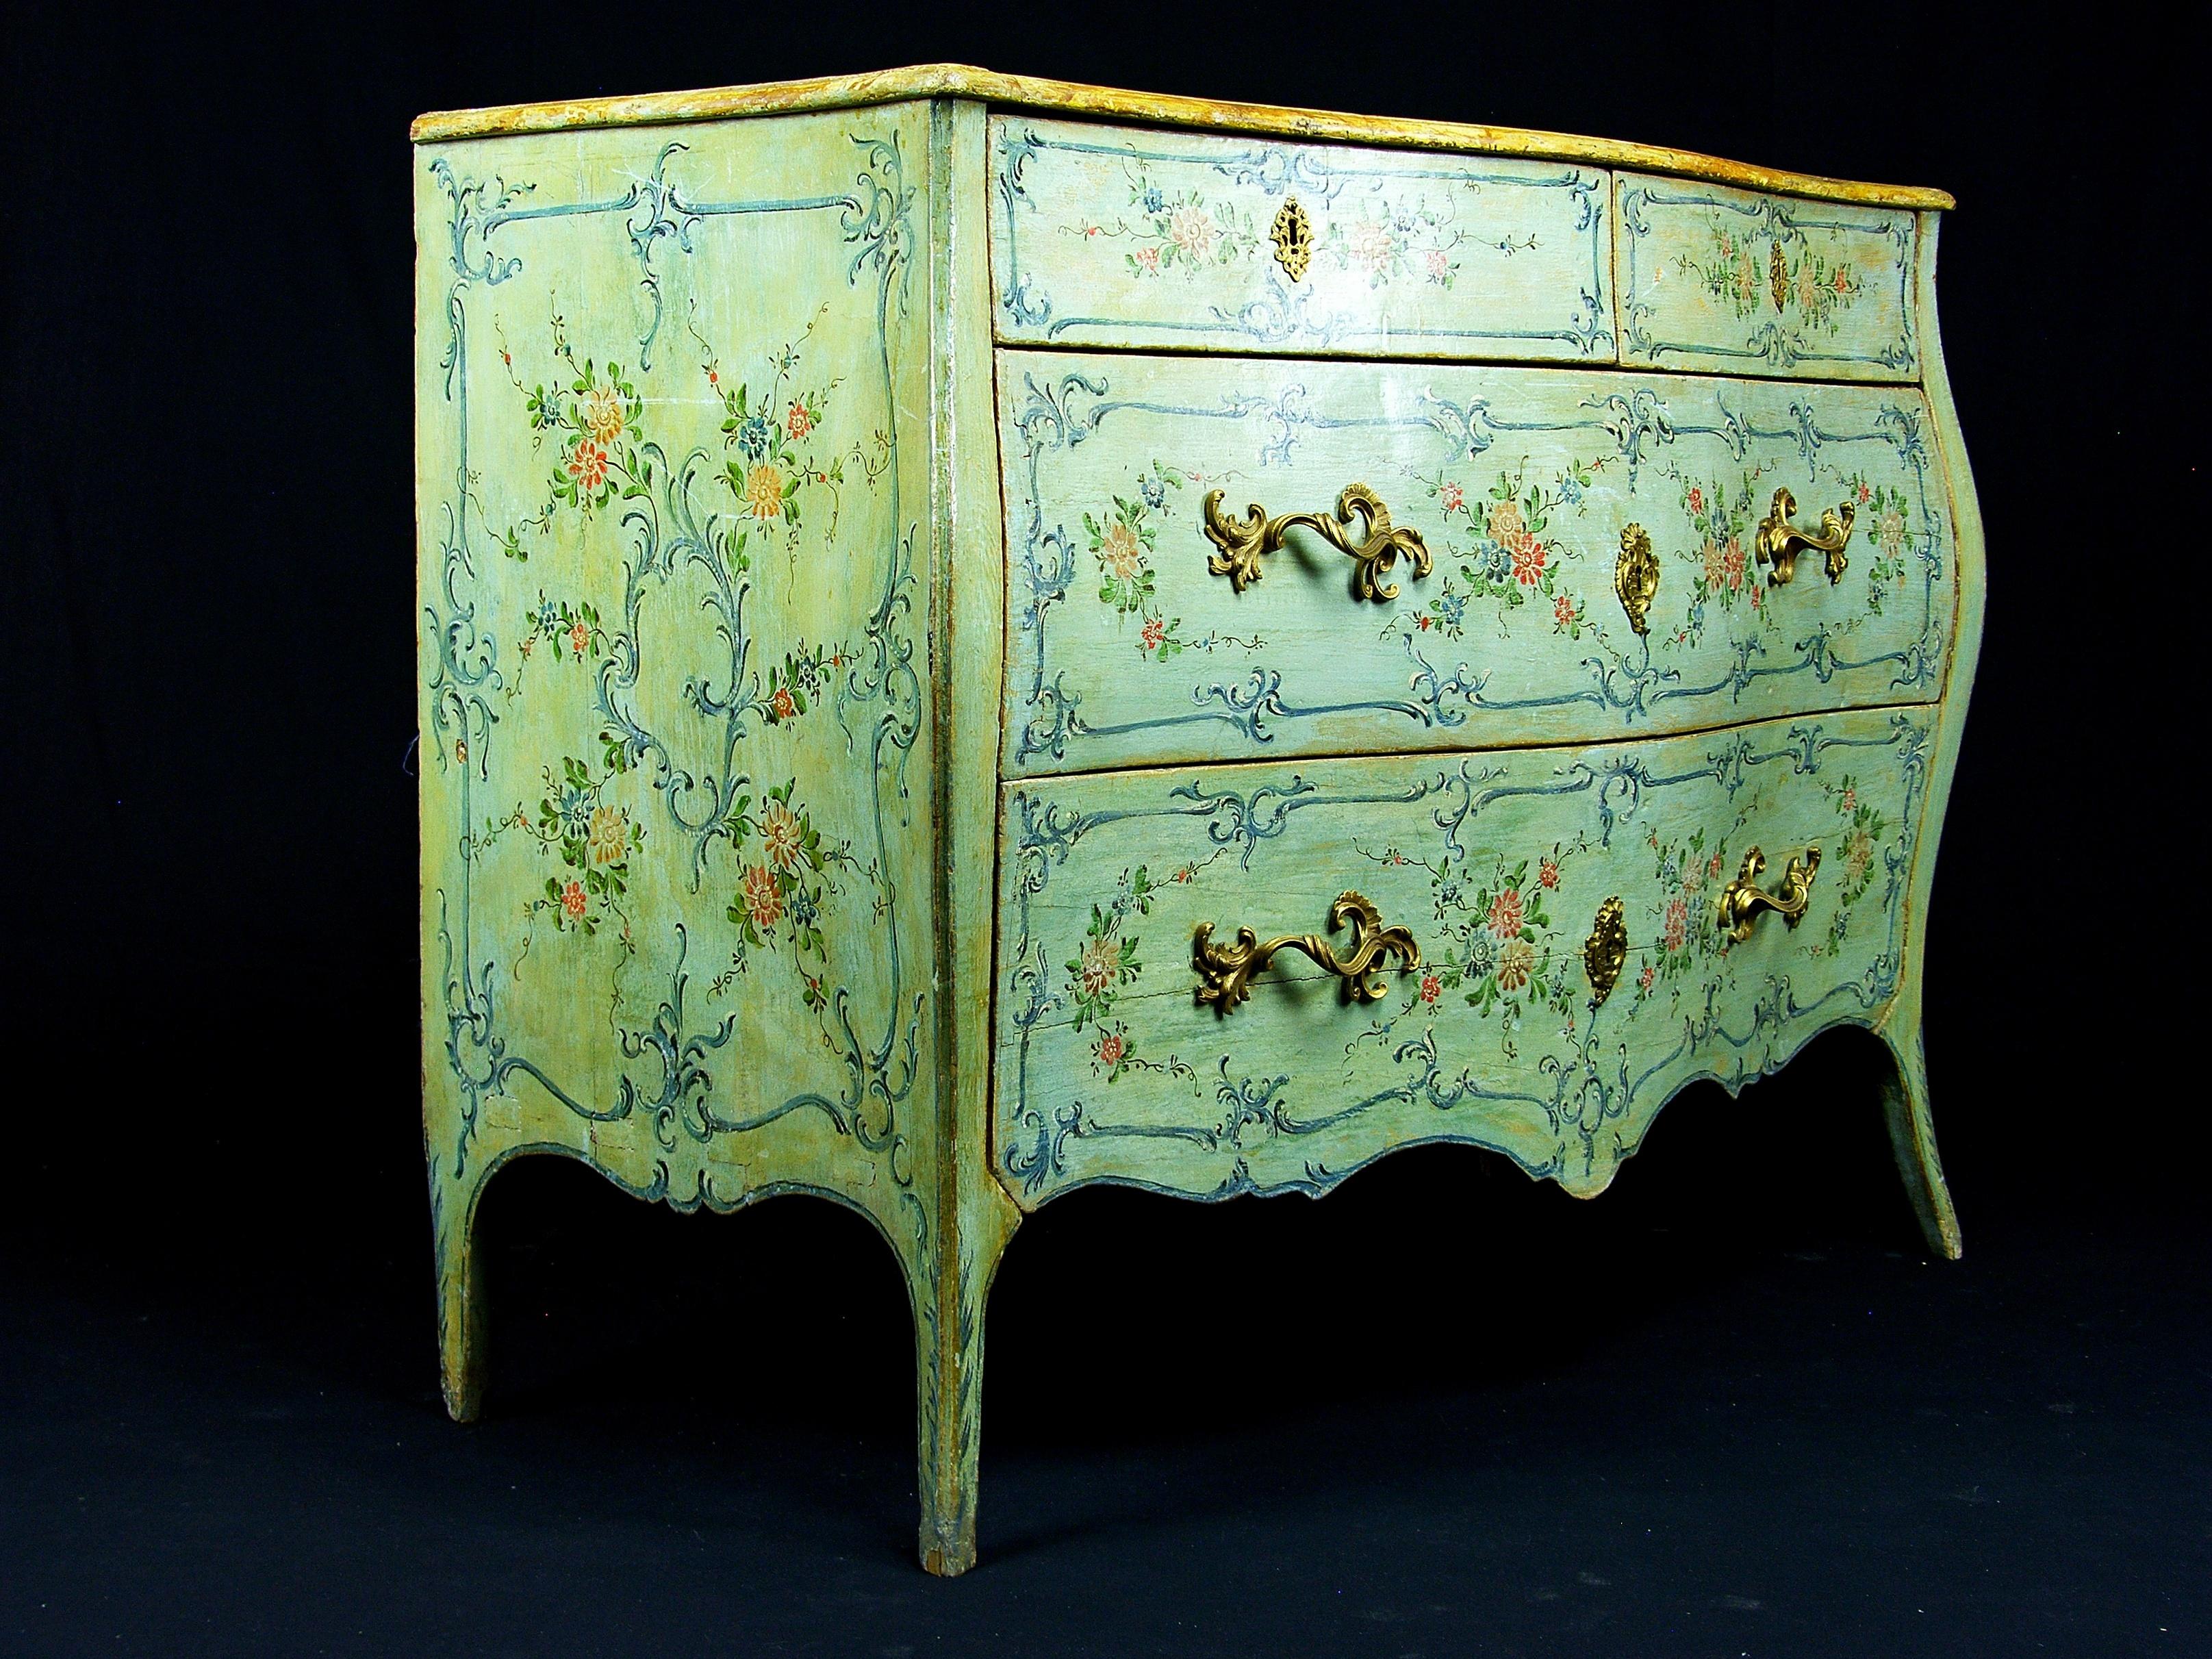 18th Century Italian Polychrome Lacquered Wooden Dresser with Floral Decorations 2